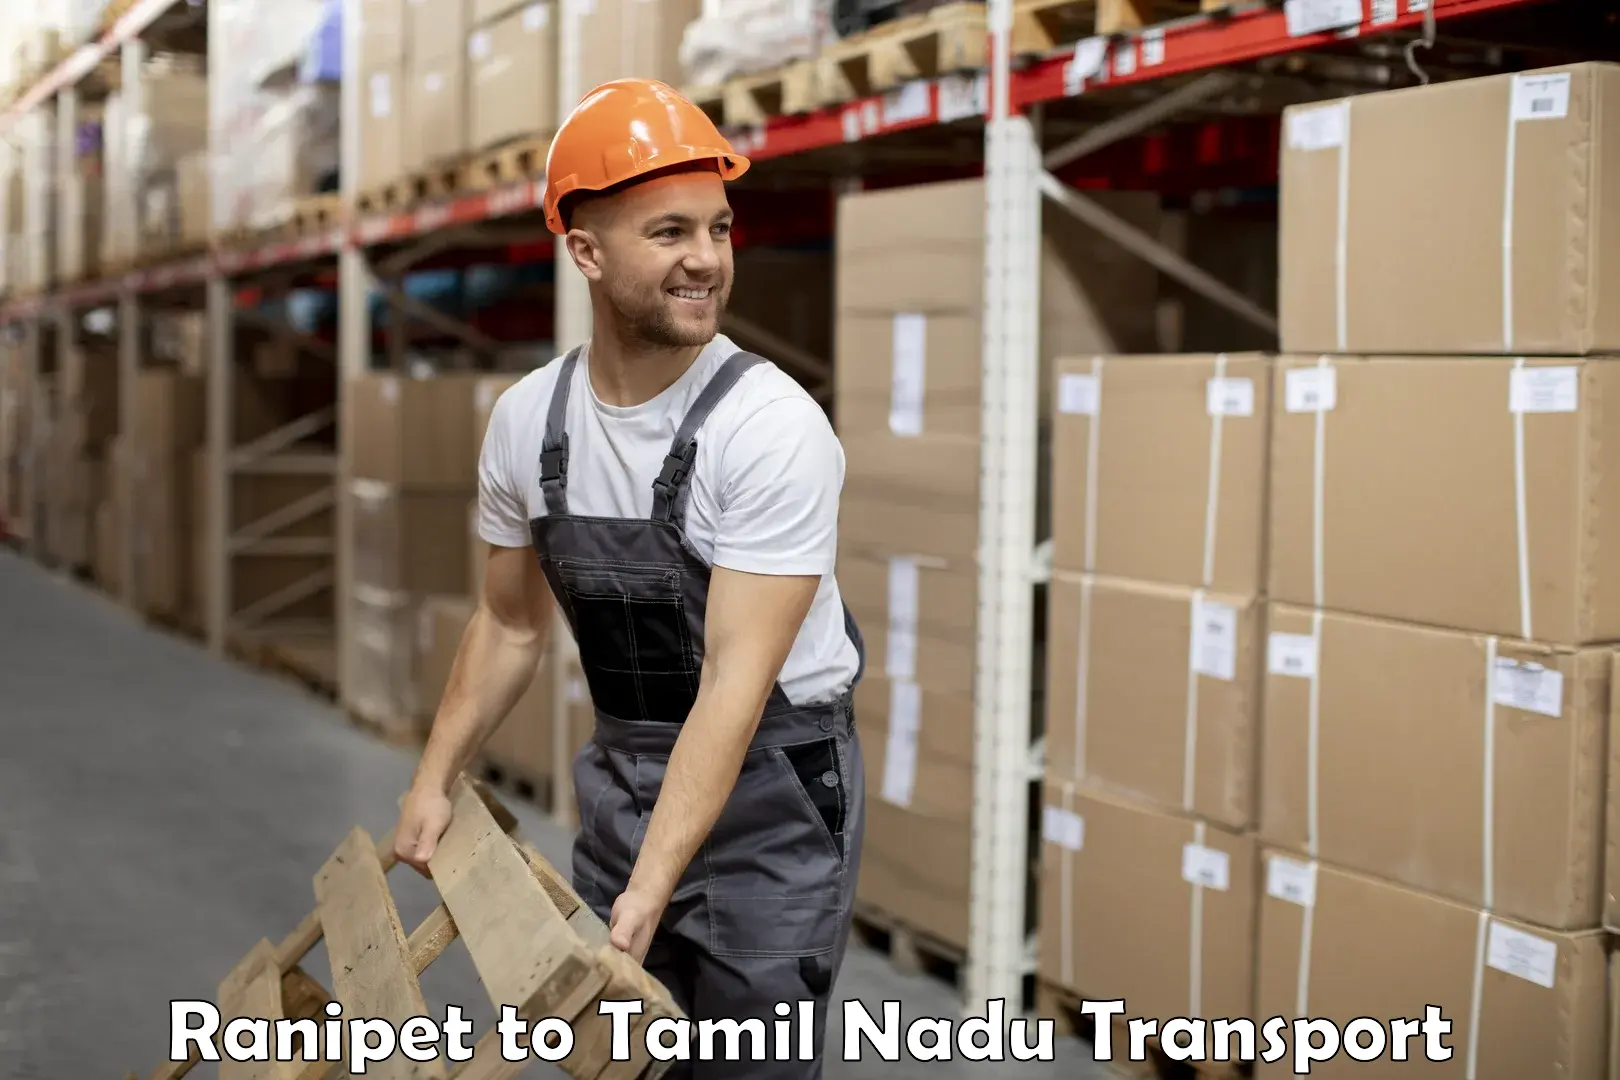 Daily parcel service transport Ranipet to Cuddalore